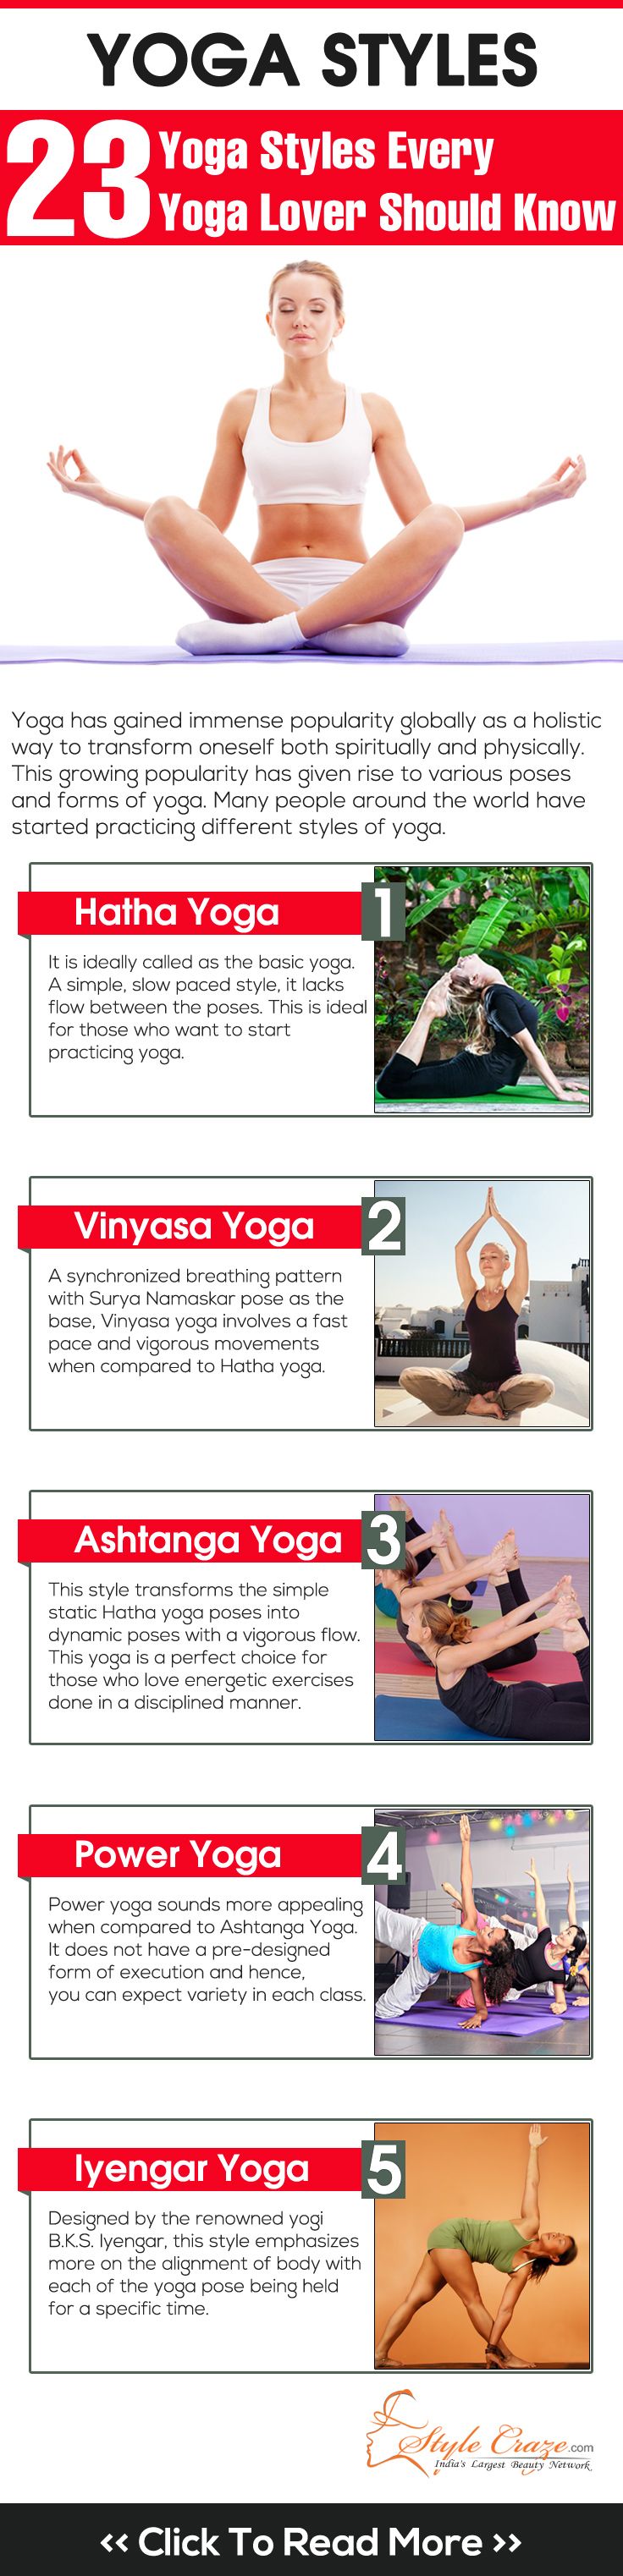 23 Yoga Styles Every Yoga Lover Should Know